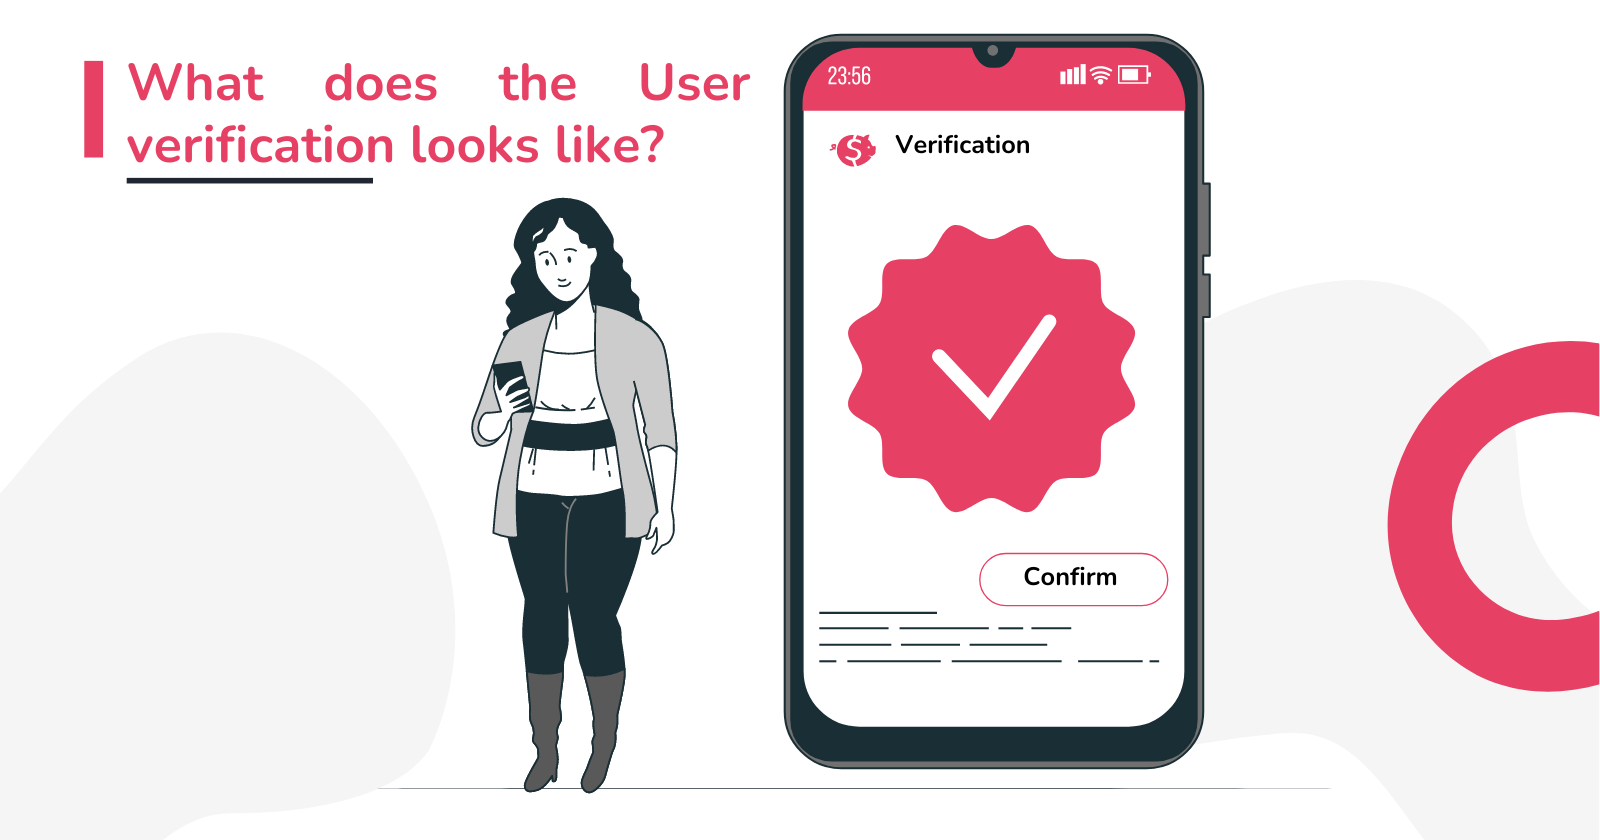 What does the User verification looks like on 4fund.com?